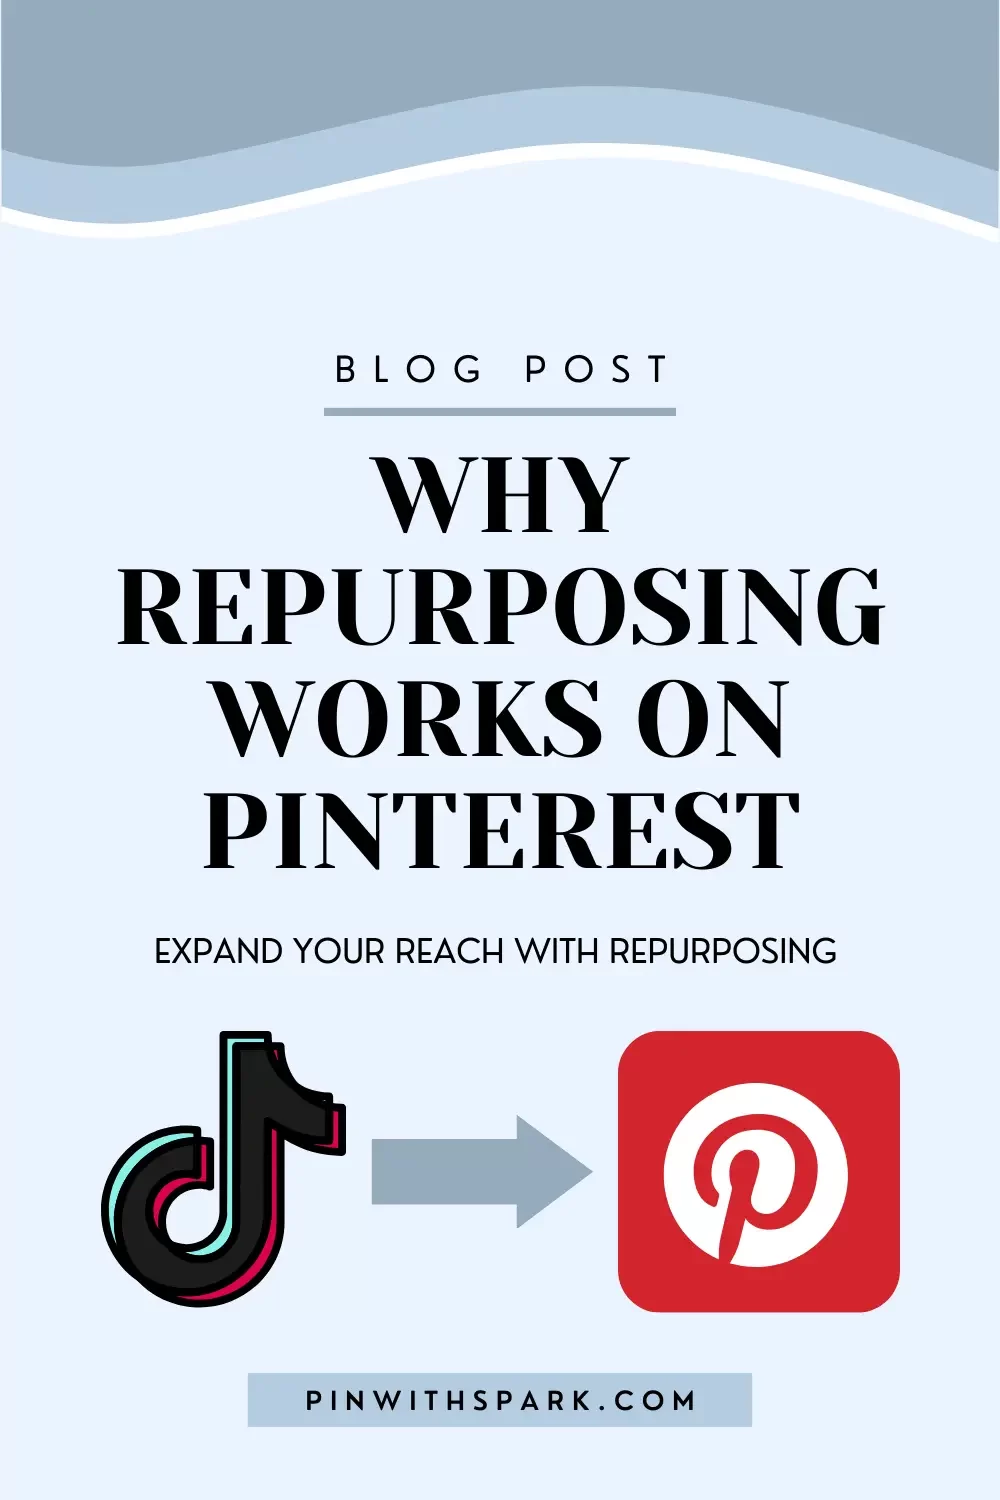 why repurposing works on Pinterest image of tiktok icon and Pinterest icon pinwithspark.com